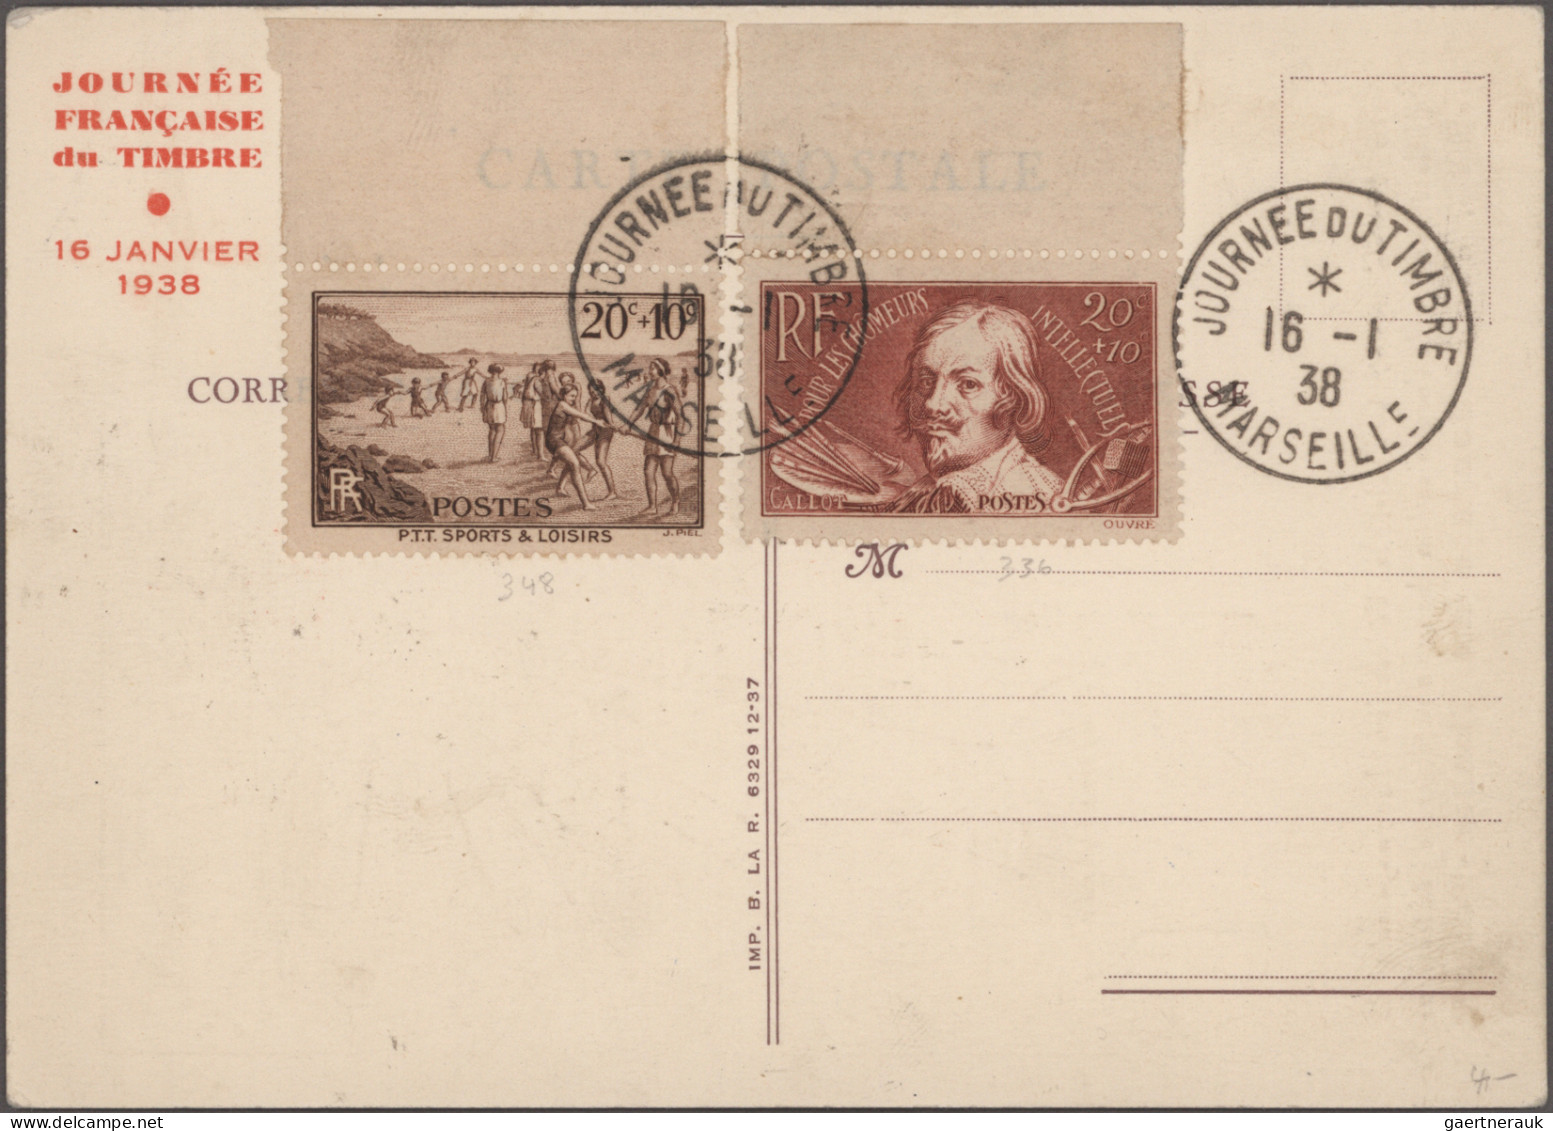 France: 1812/2004, sophisticated balance of apprx. 390 covers/cards from a good